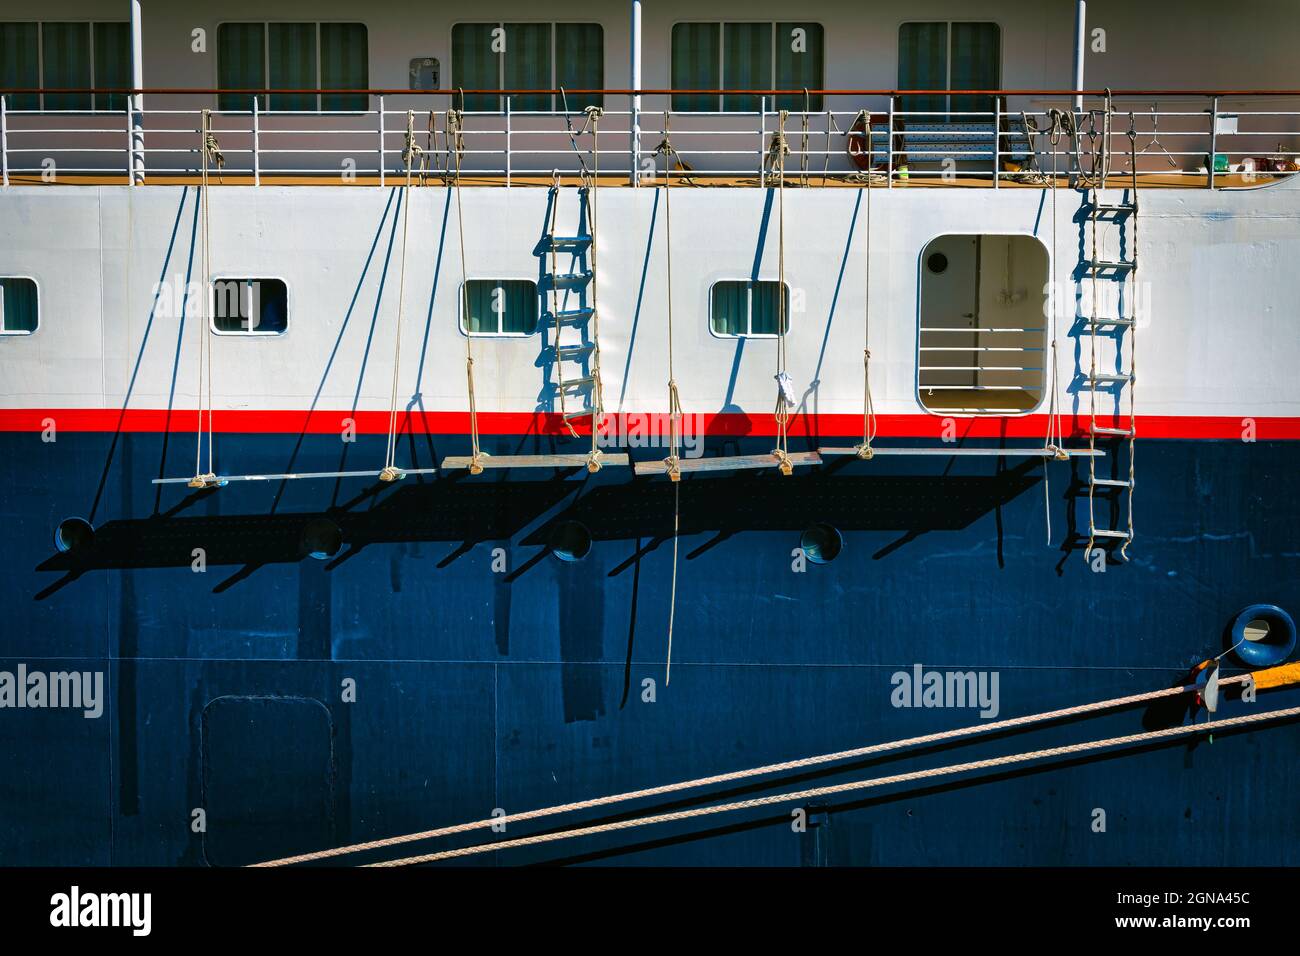 Scaffolding hangs on the side of a cruise ship in the process of being repainted and docked in Yokohama, Japan. Stock Photo